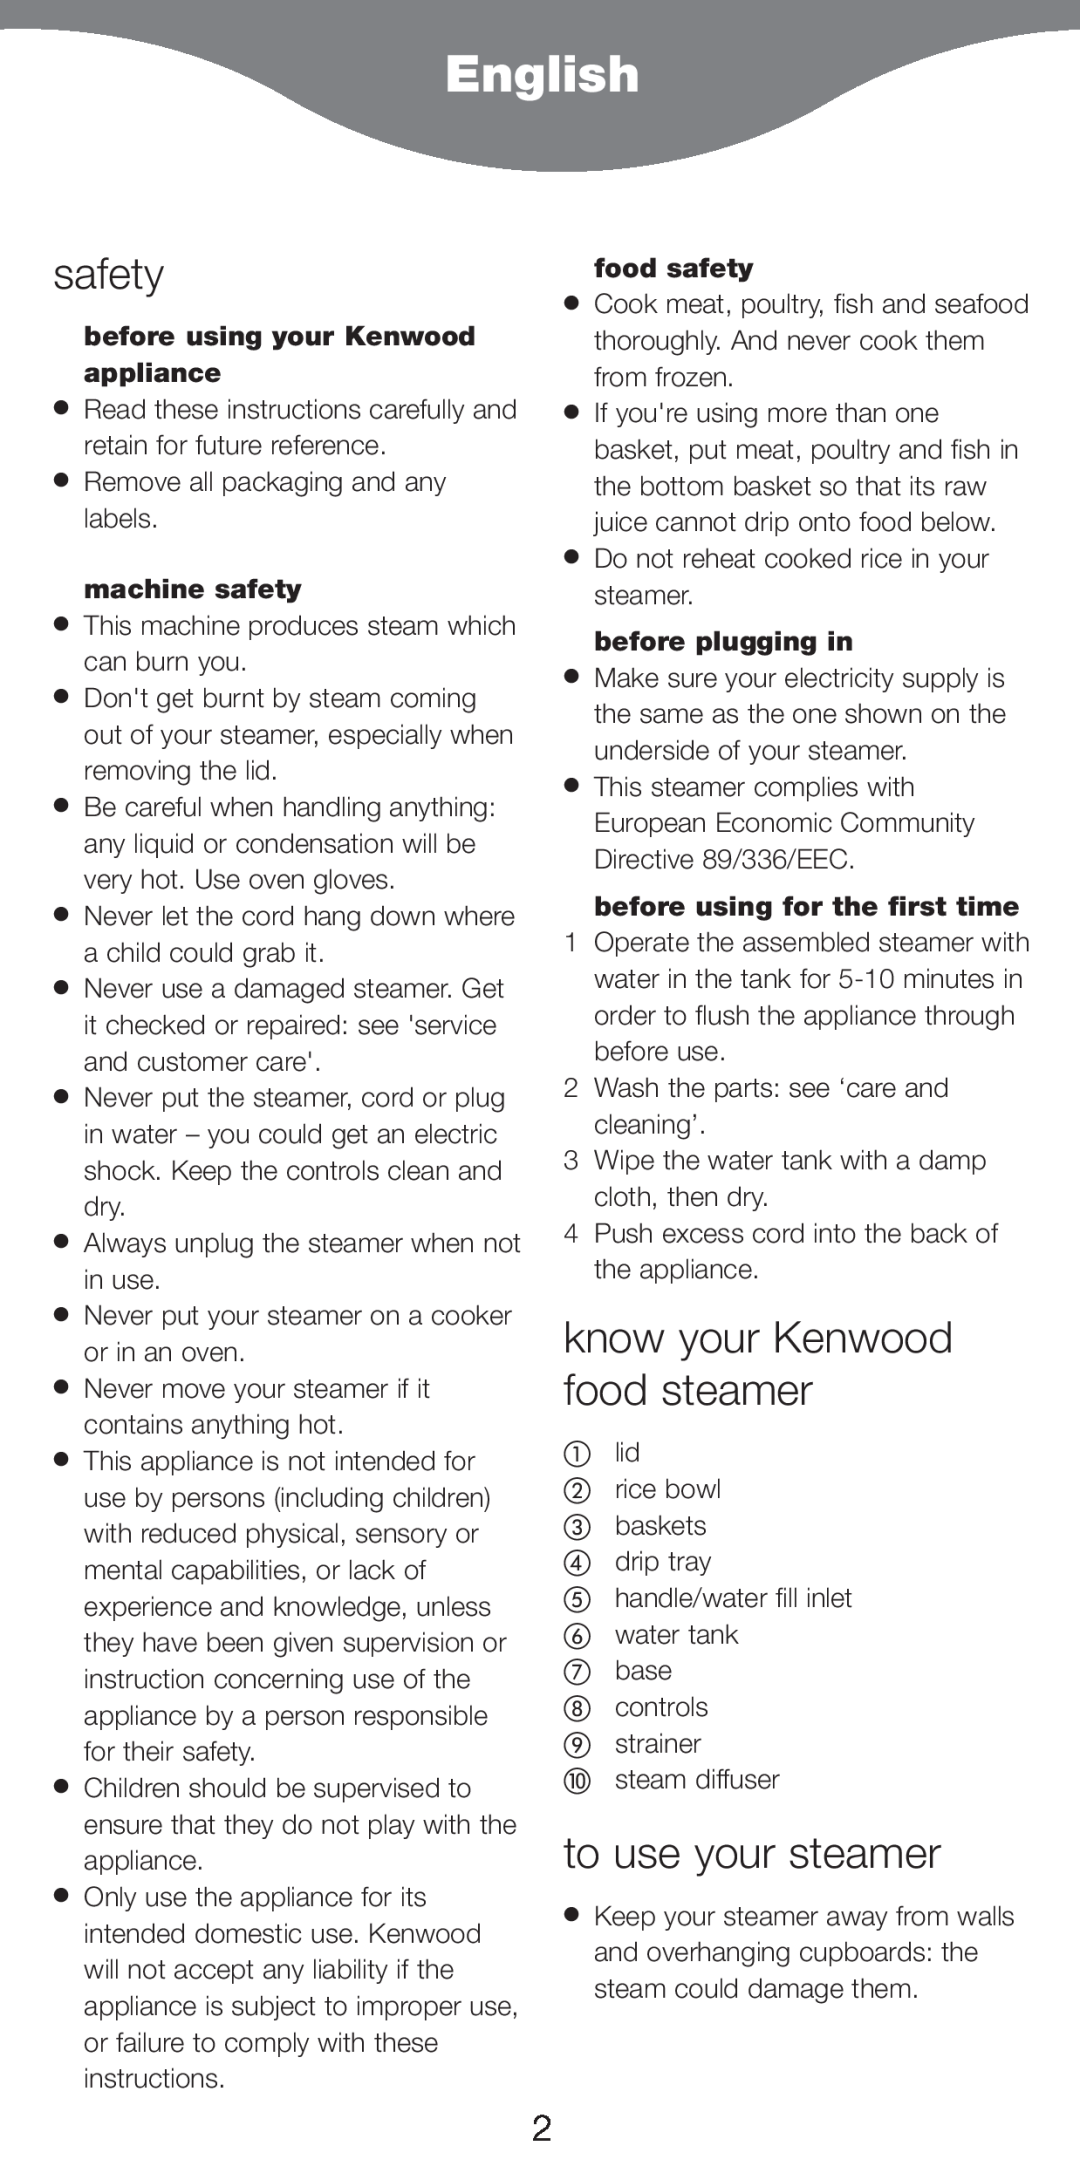 Kenwood FS470 series manual English, know your Kenwood food steamer, to use your steamer, machine safety, food safety 